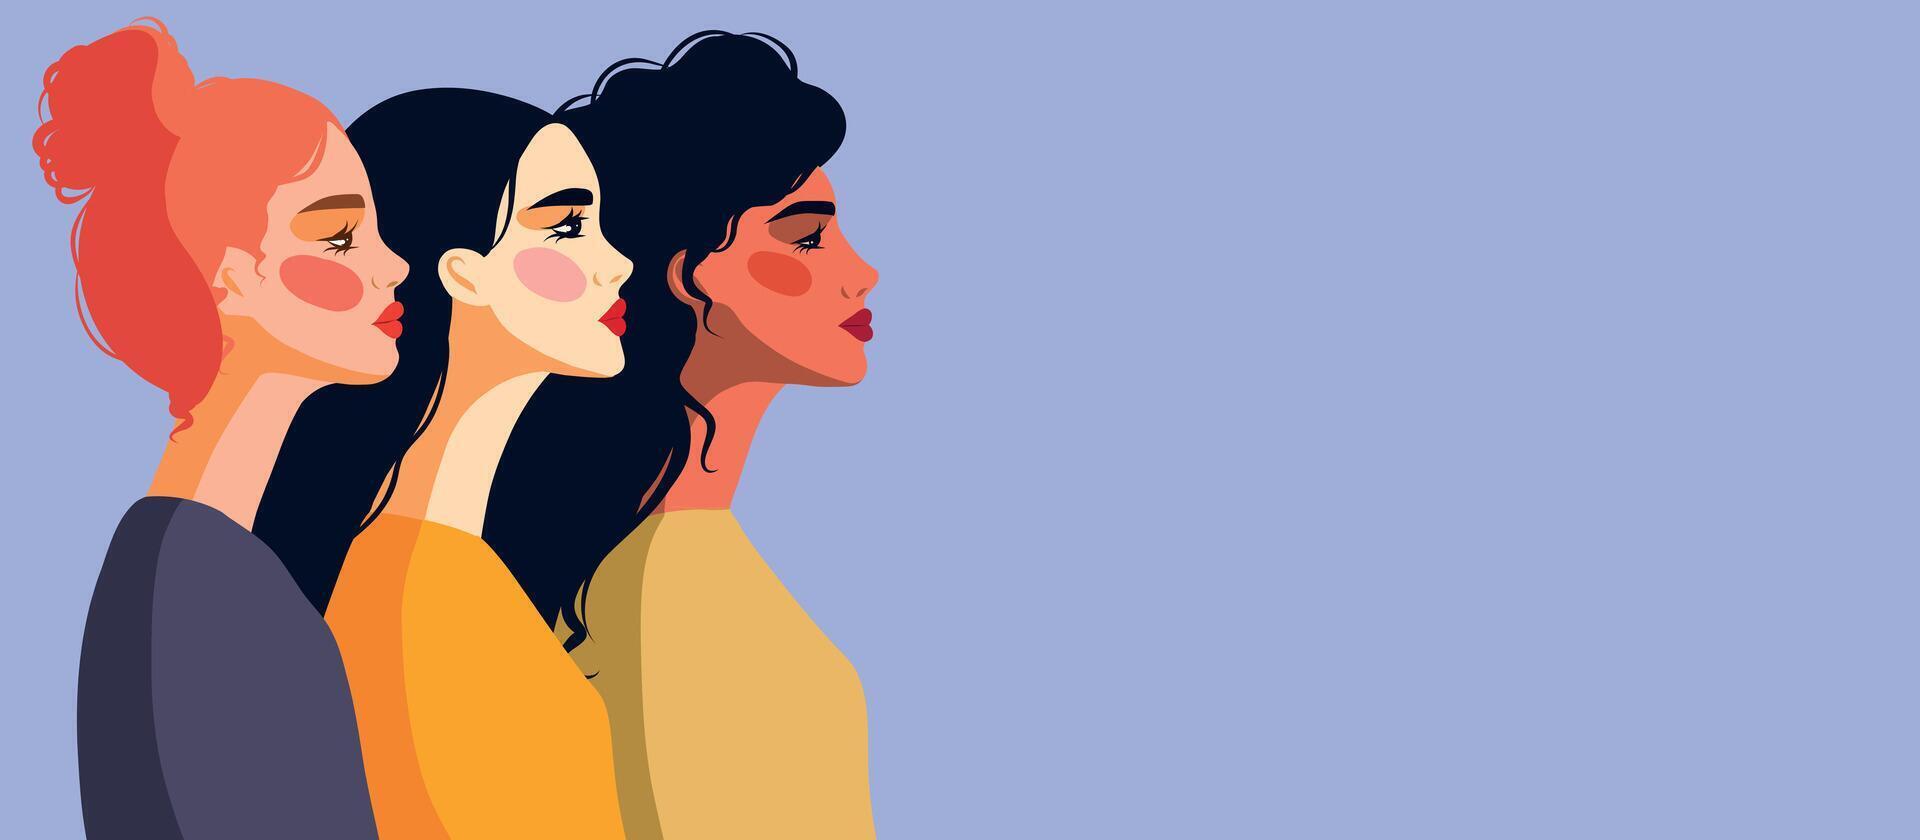 banner for International Women's Day, three women of different ethnic groups stand side by side on a gentle background. Concept movement gender equality and women's empowerment vector